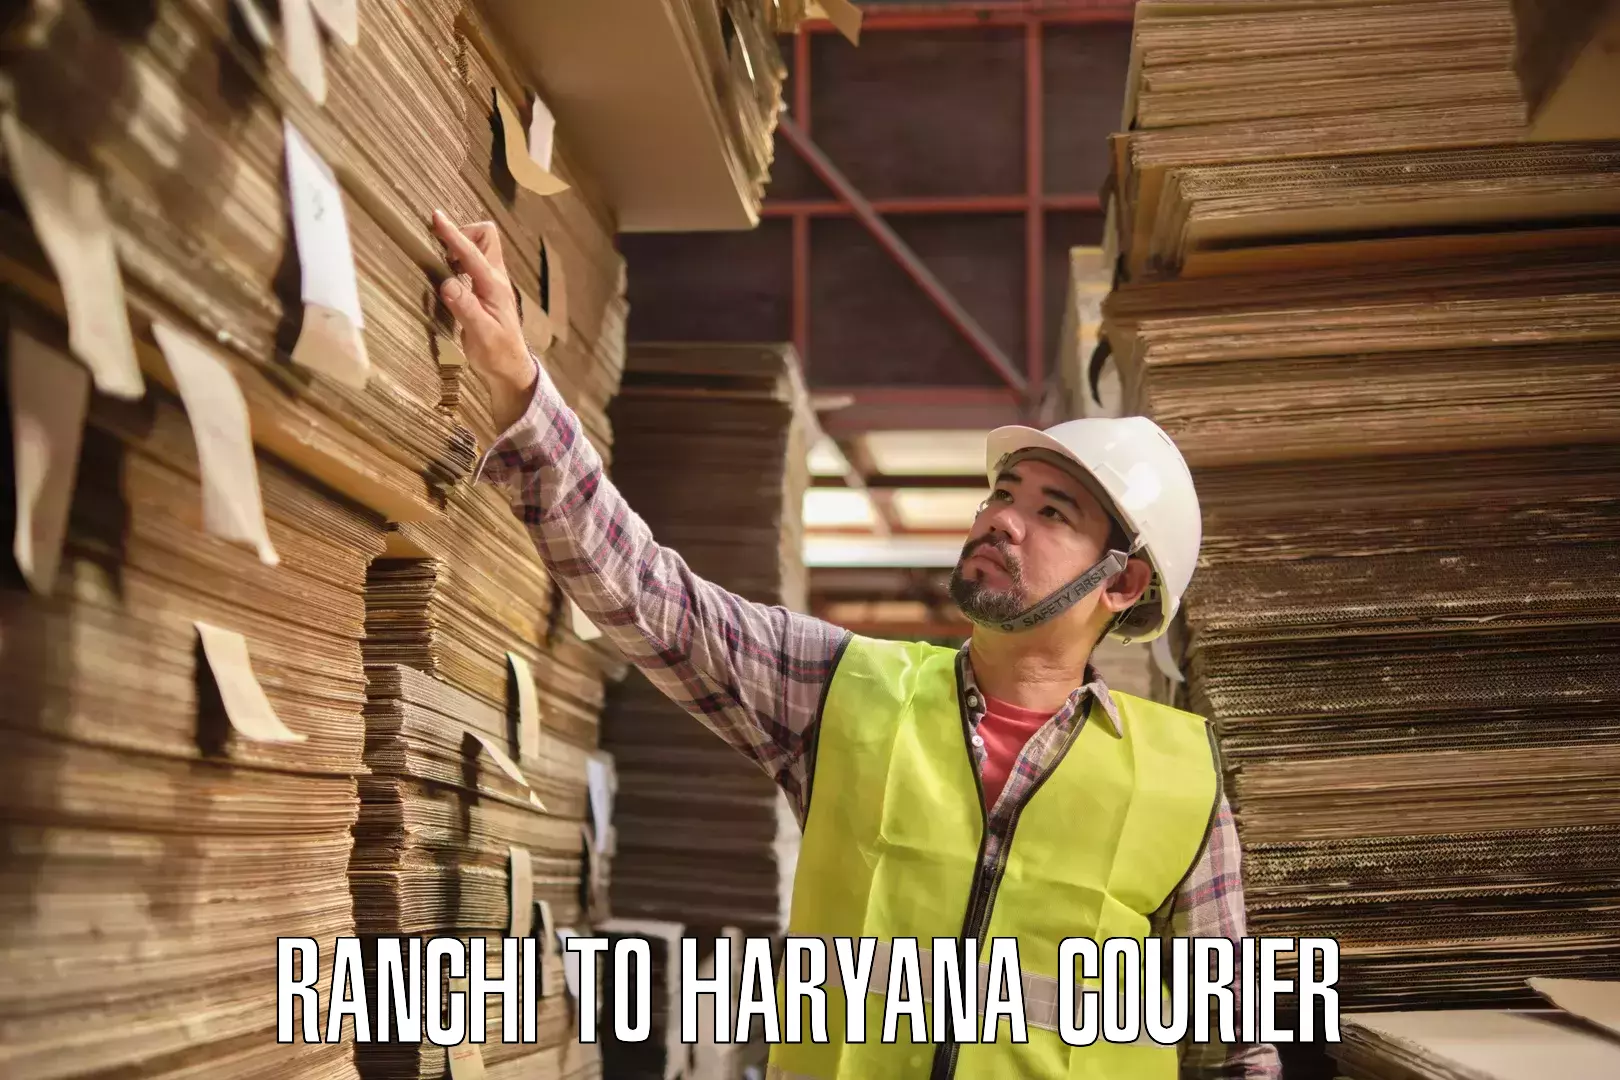 Courier service innovation Ranchi to NCR Haryana